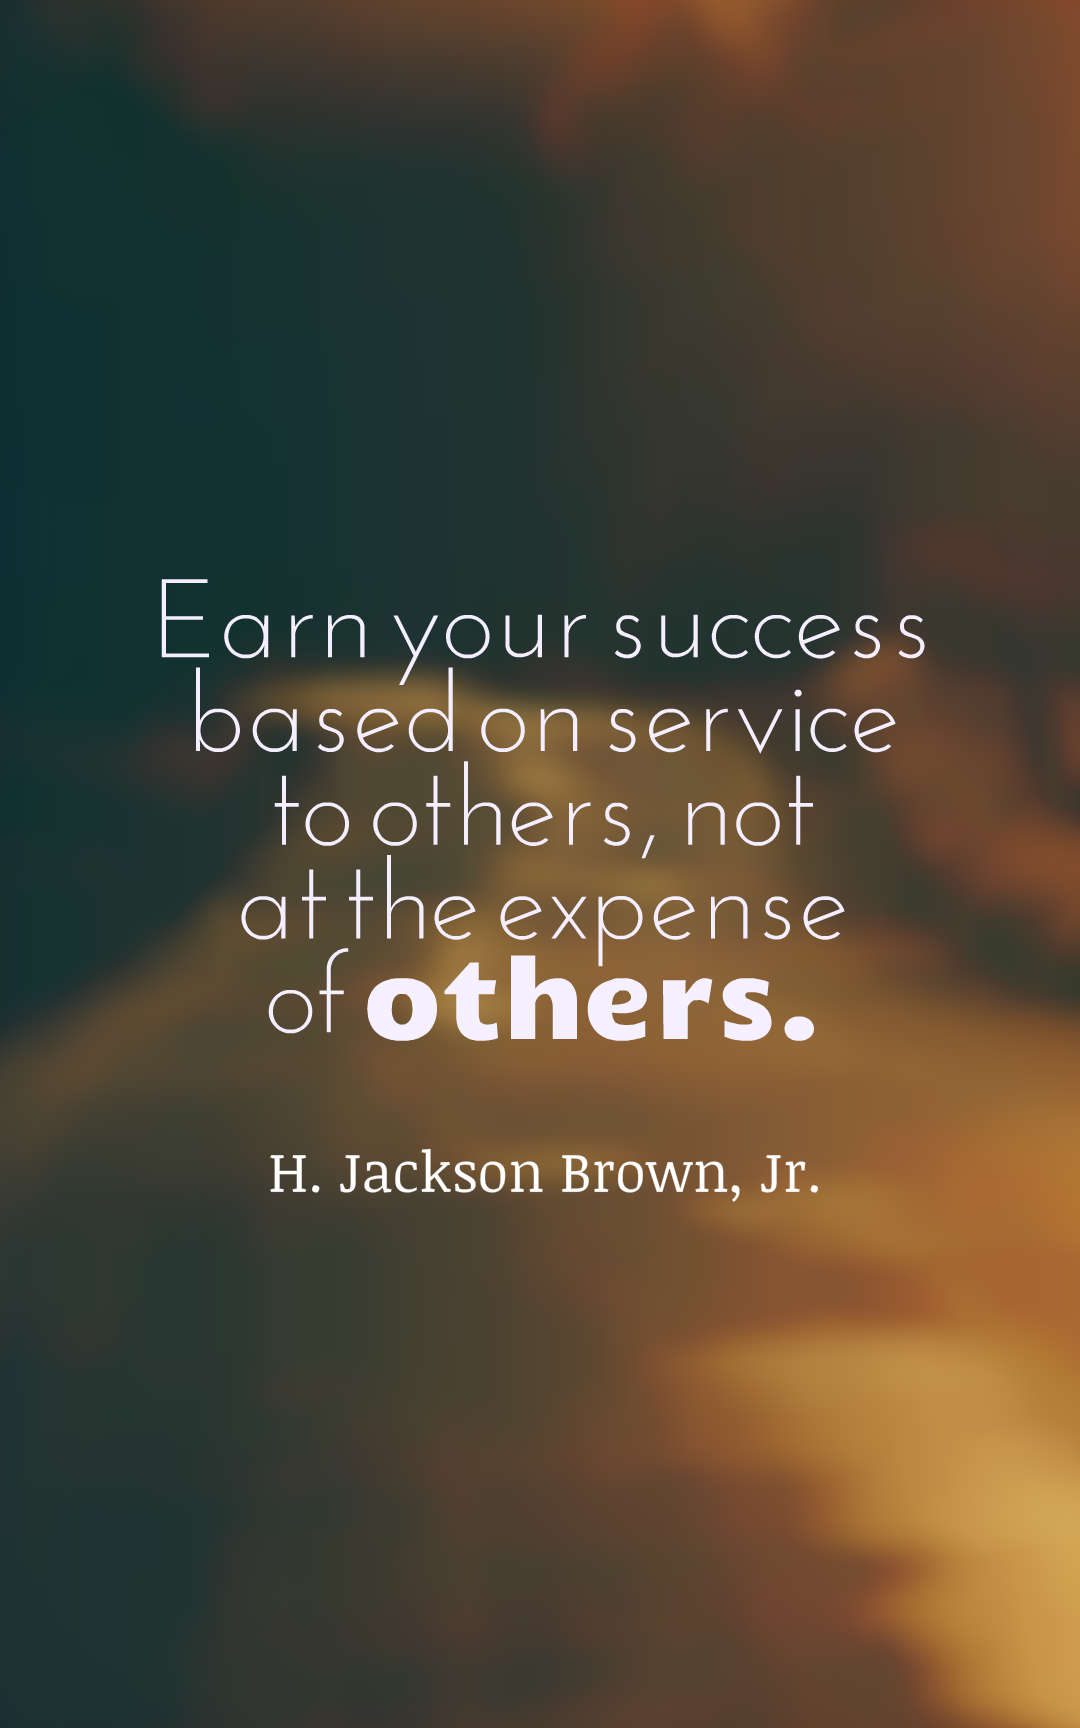 Earn your success based on service to others, not at the expense of others